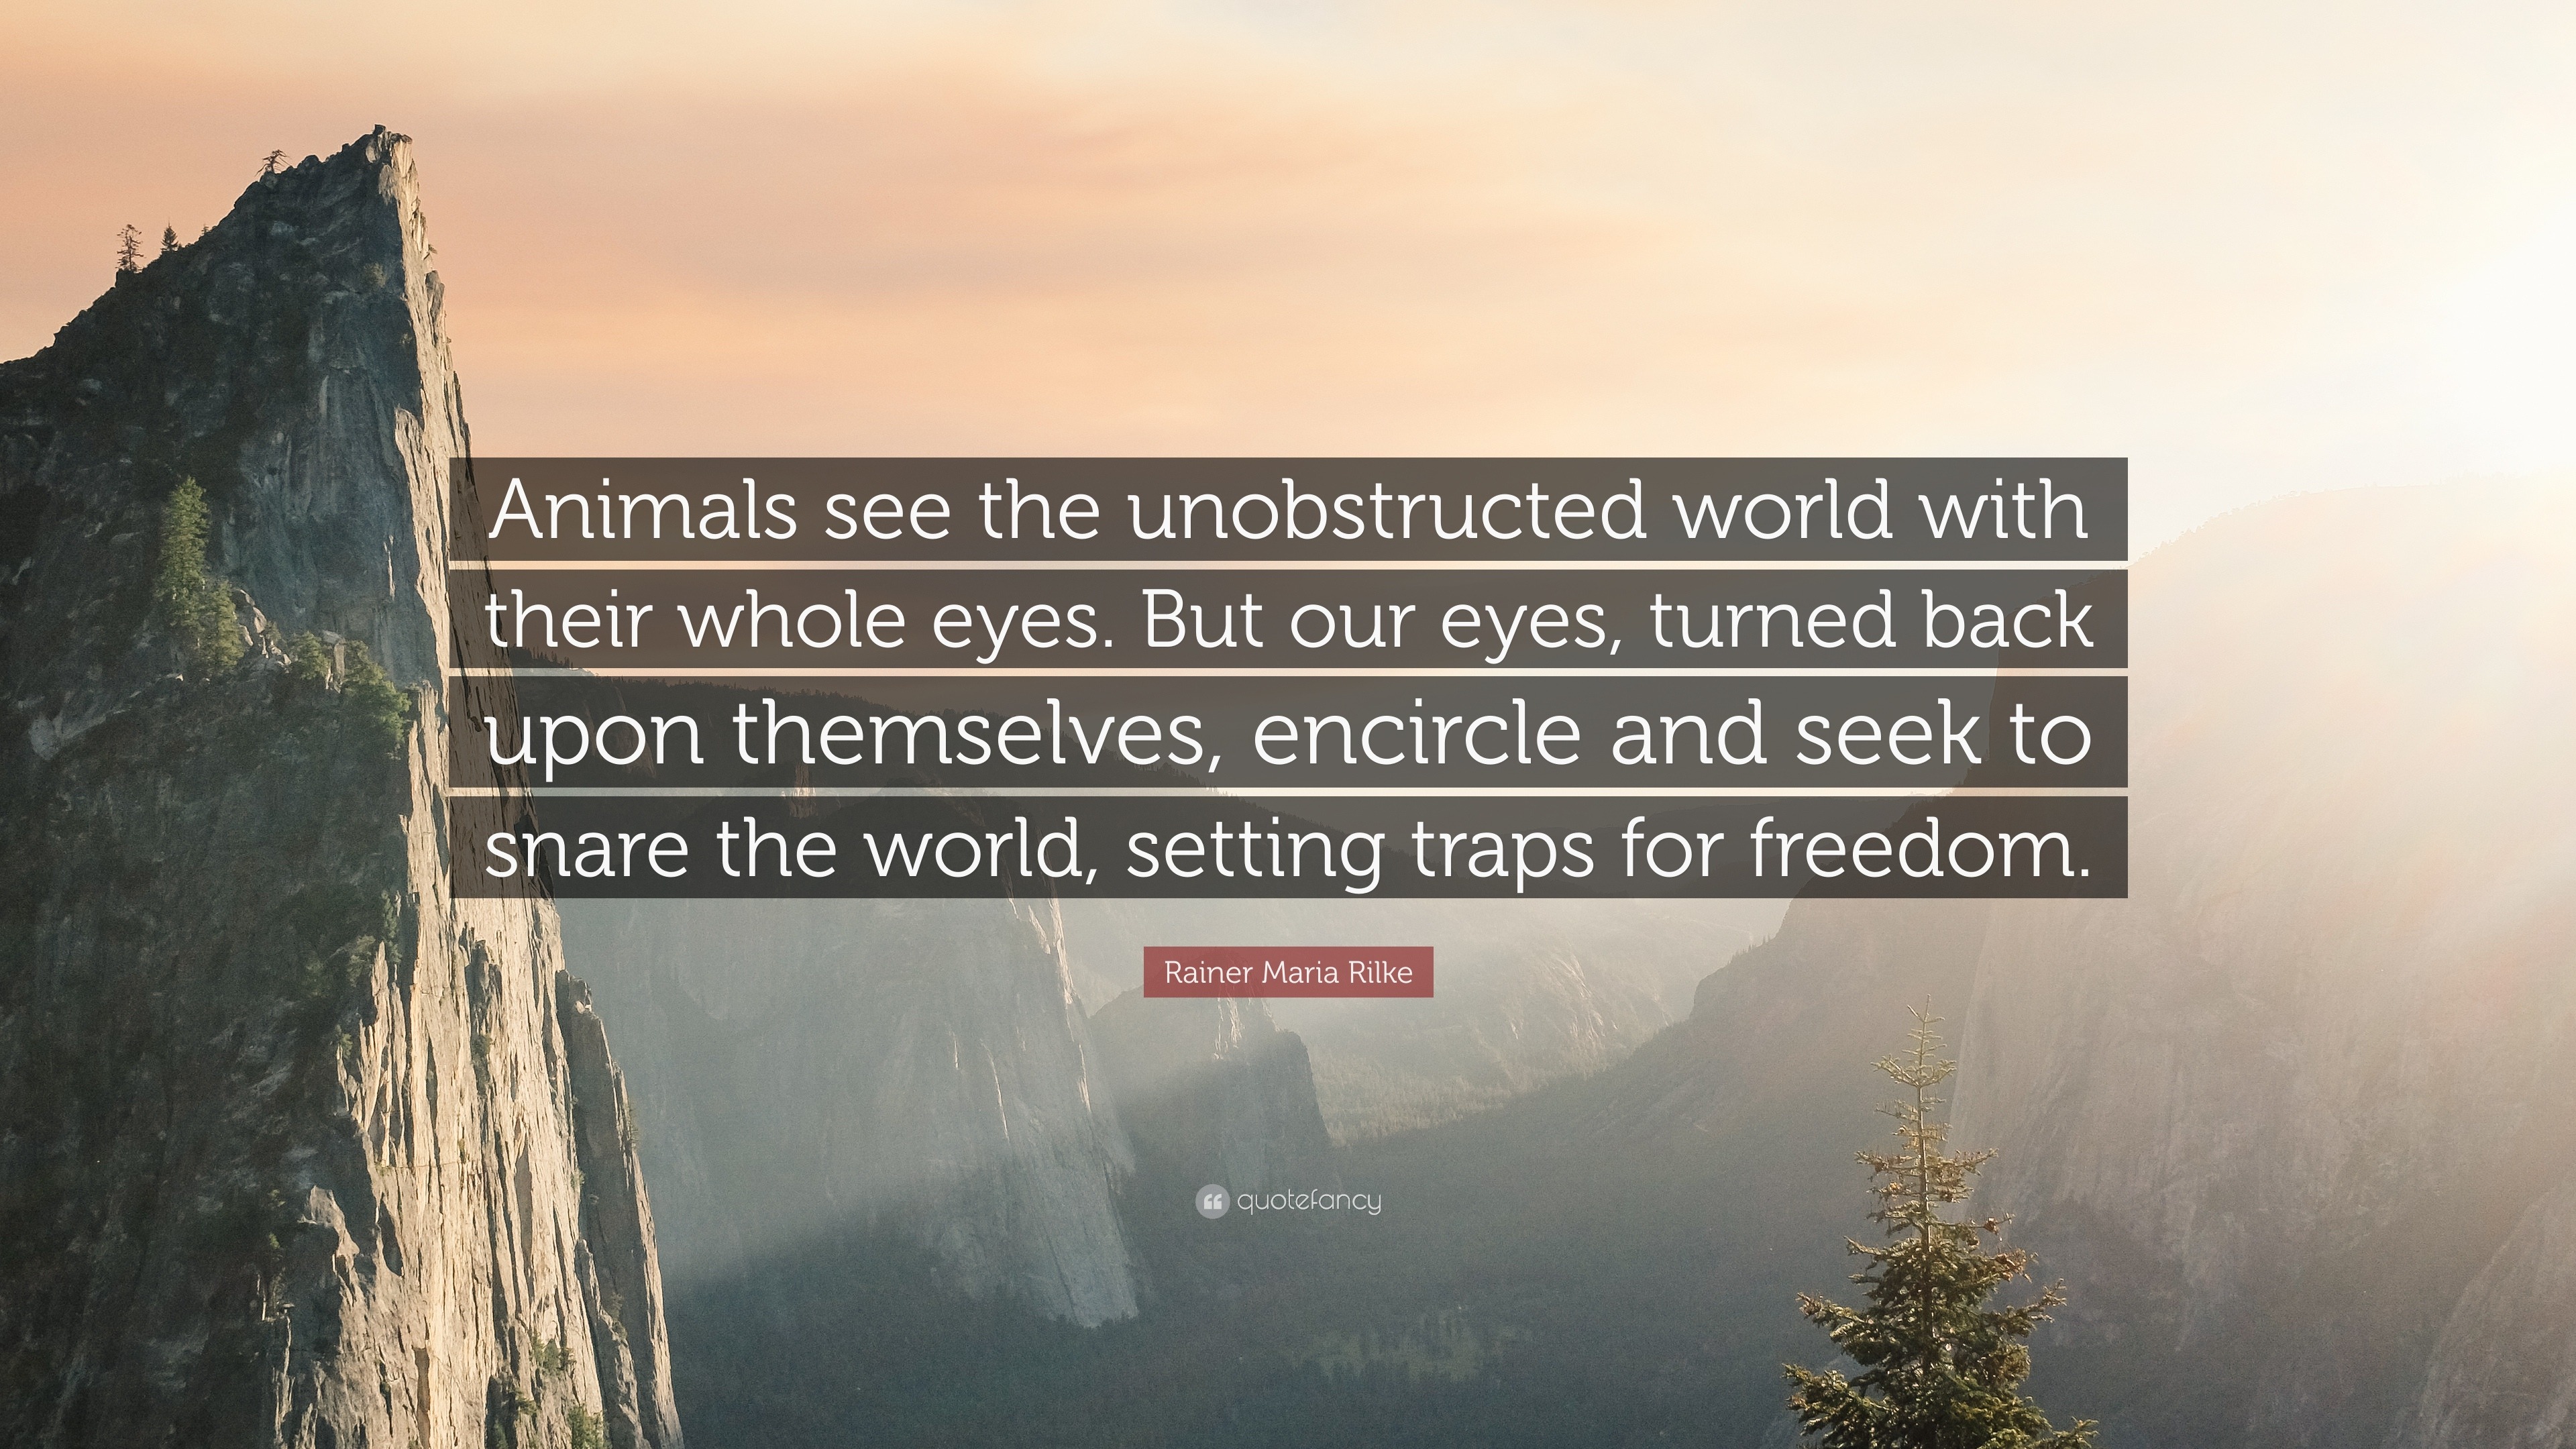 Rainer Maria Rilke Quote: “Animals see the unobstructed world with their  whole eyes. But our eyes, turned back upon themselves, encircle and seek  t...”